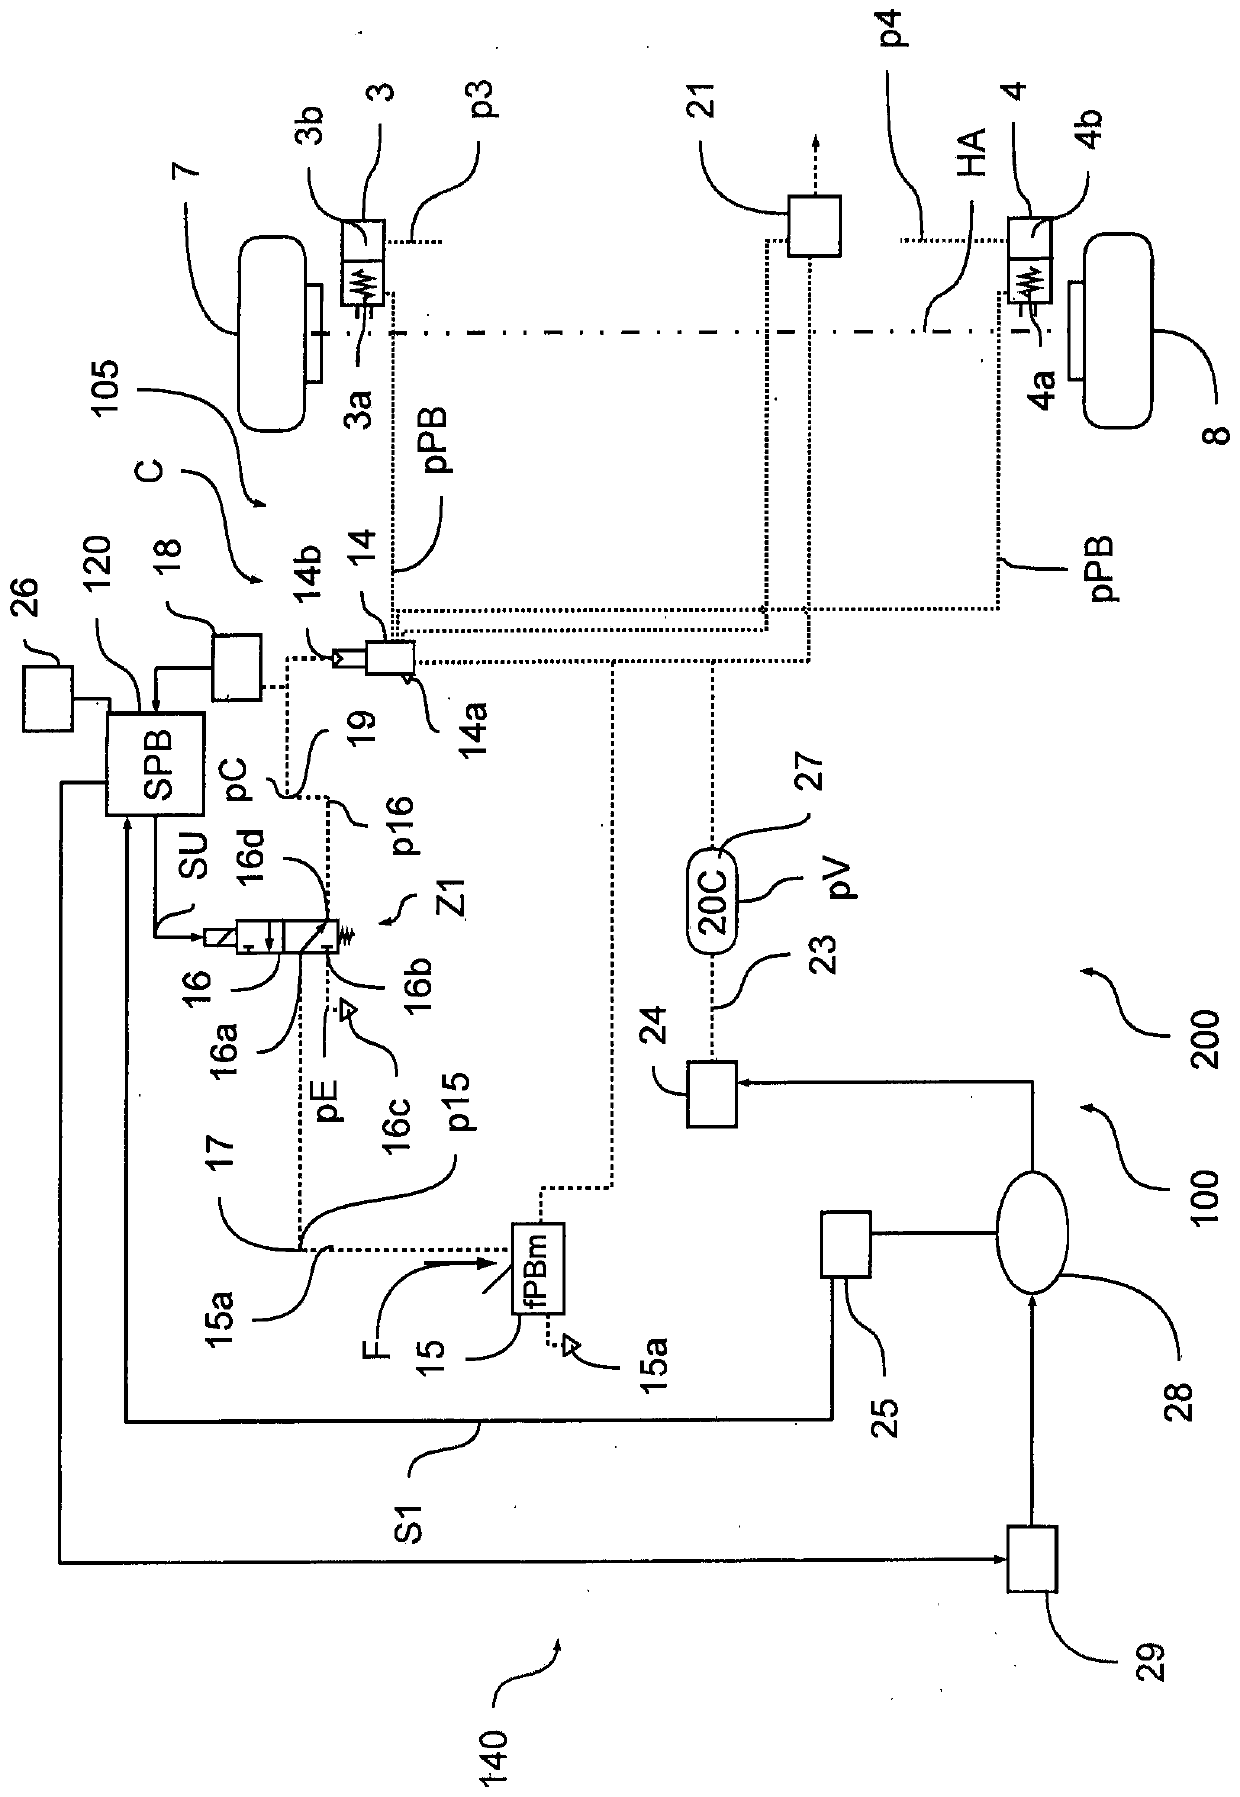 Electronically controllable pneumatic brake system in a utility vehicle and method for electronically controlling a pneumatic brake system in a utility vehicle